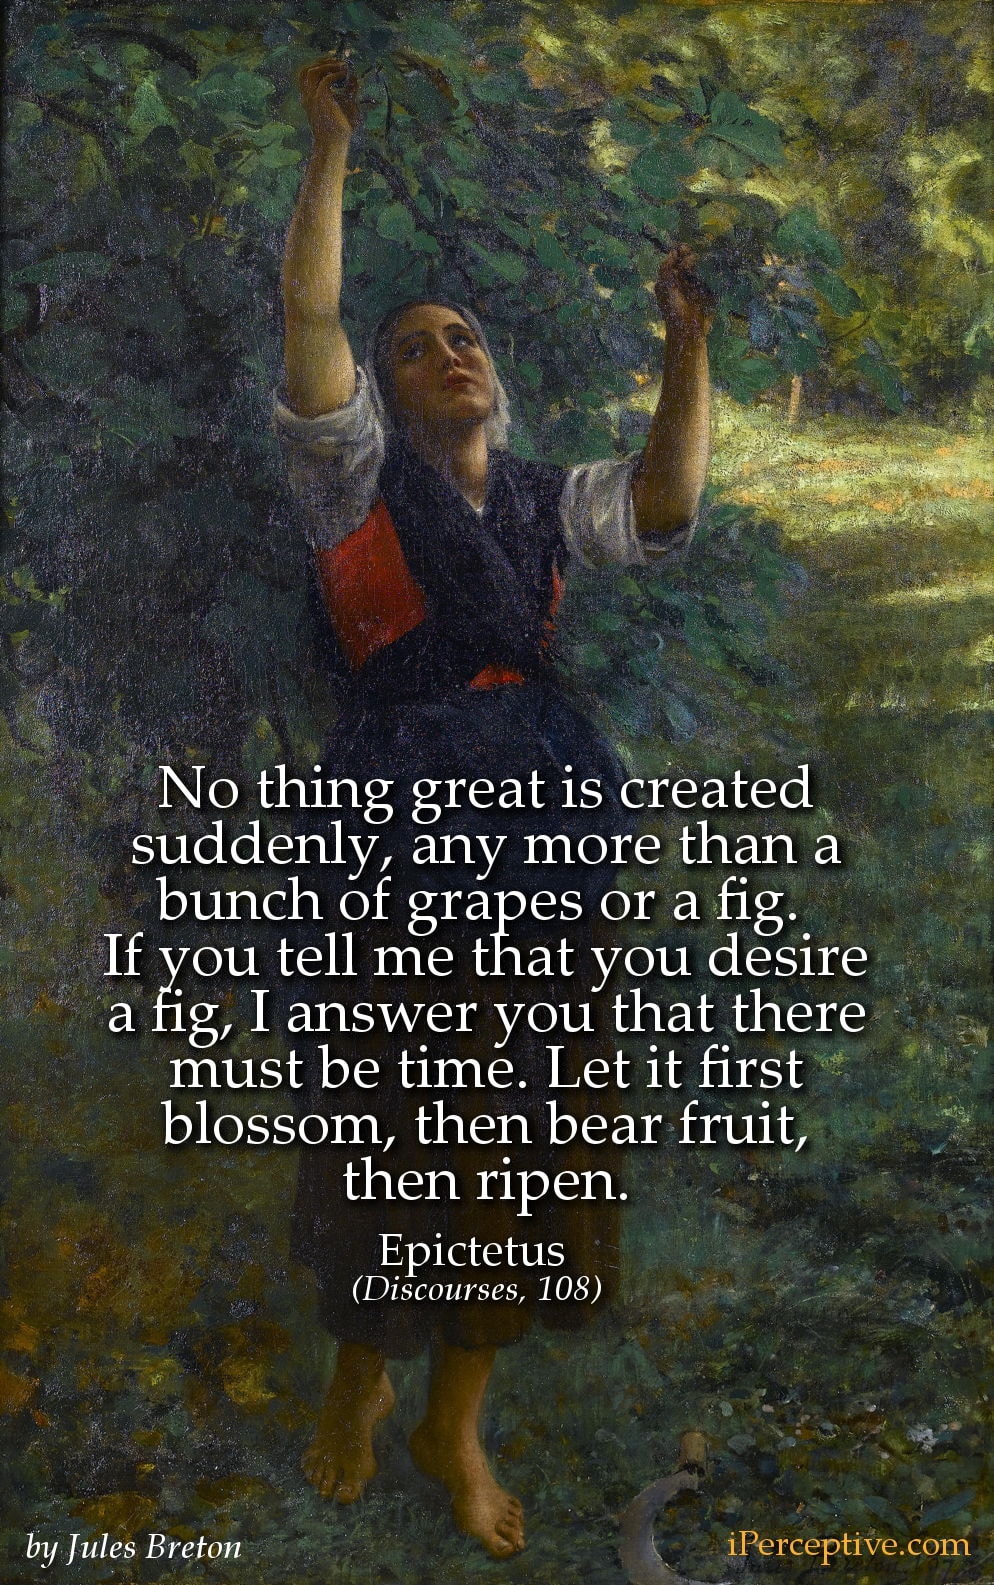 Epictetus Stoic Quote on Time: No thing great is created suddenly, any more...